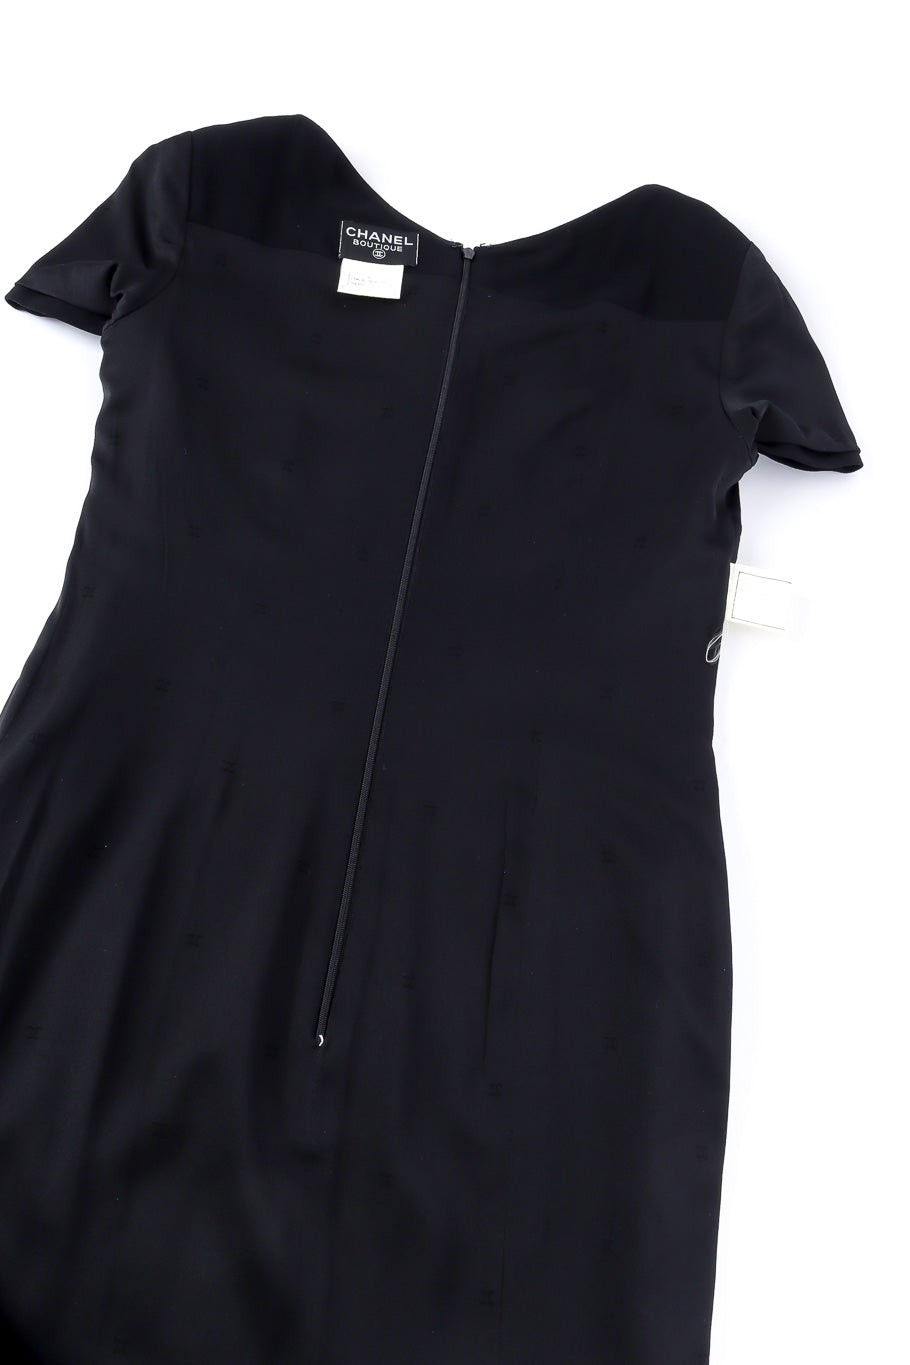 Sheath dress by Chanel Boutique flat lay inside out @recessla